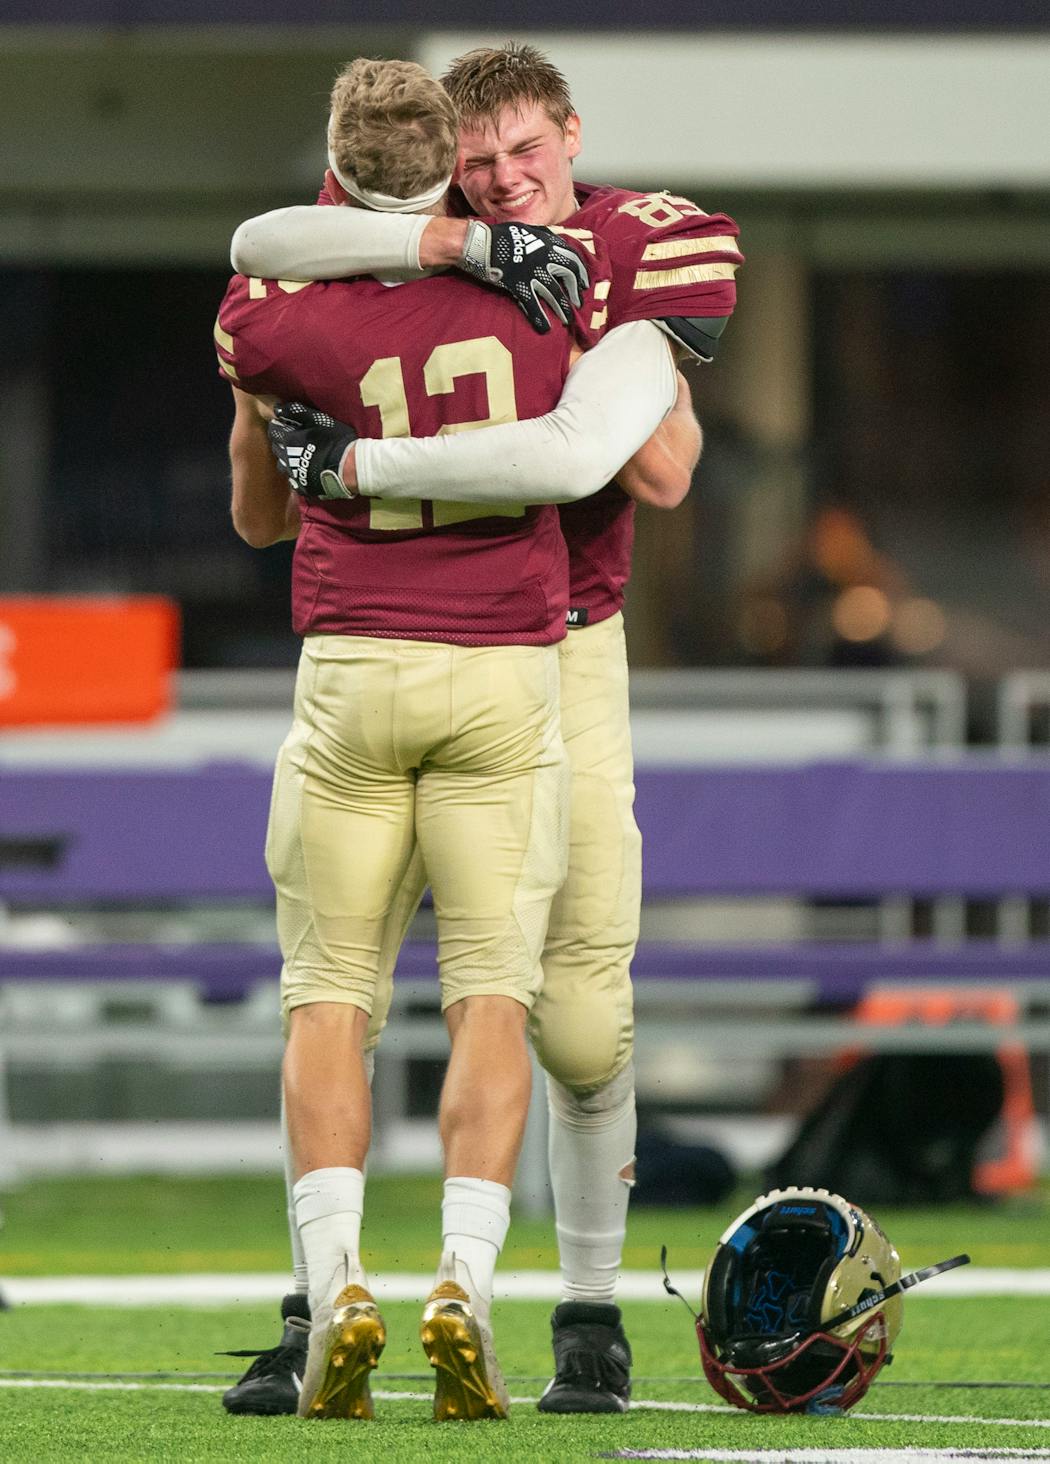 Lakeville South quarterback Camden Dean (12) and tight end Zach Juckel embraced after the Cougars secured the 2021 Class 6A title. Each is on to college football, adding to the challenge faced in 2022 by coach Ben Burk.